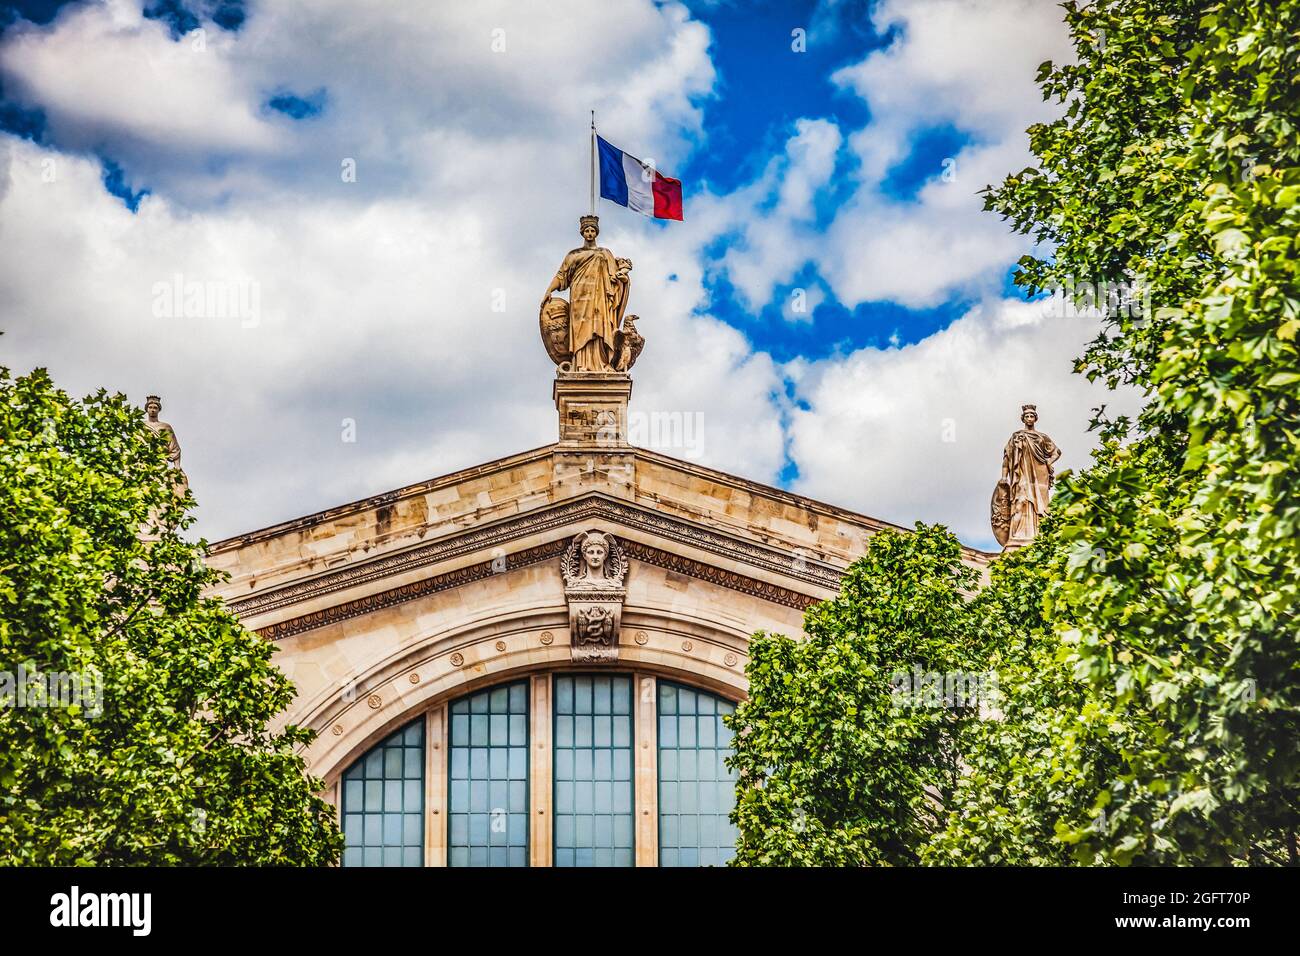 Gare du Nord North Train Station Flag Statue Building Paris France. Built in 1860s, one of six railroad stations in Paris Busiest railway station in E Stock Photo